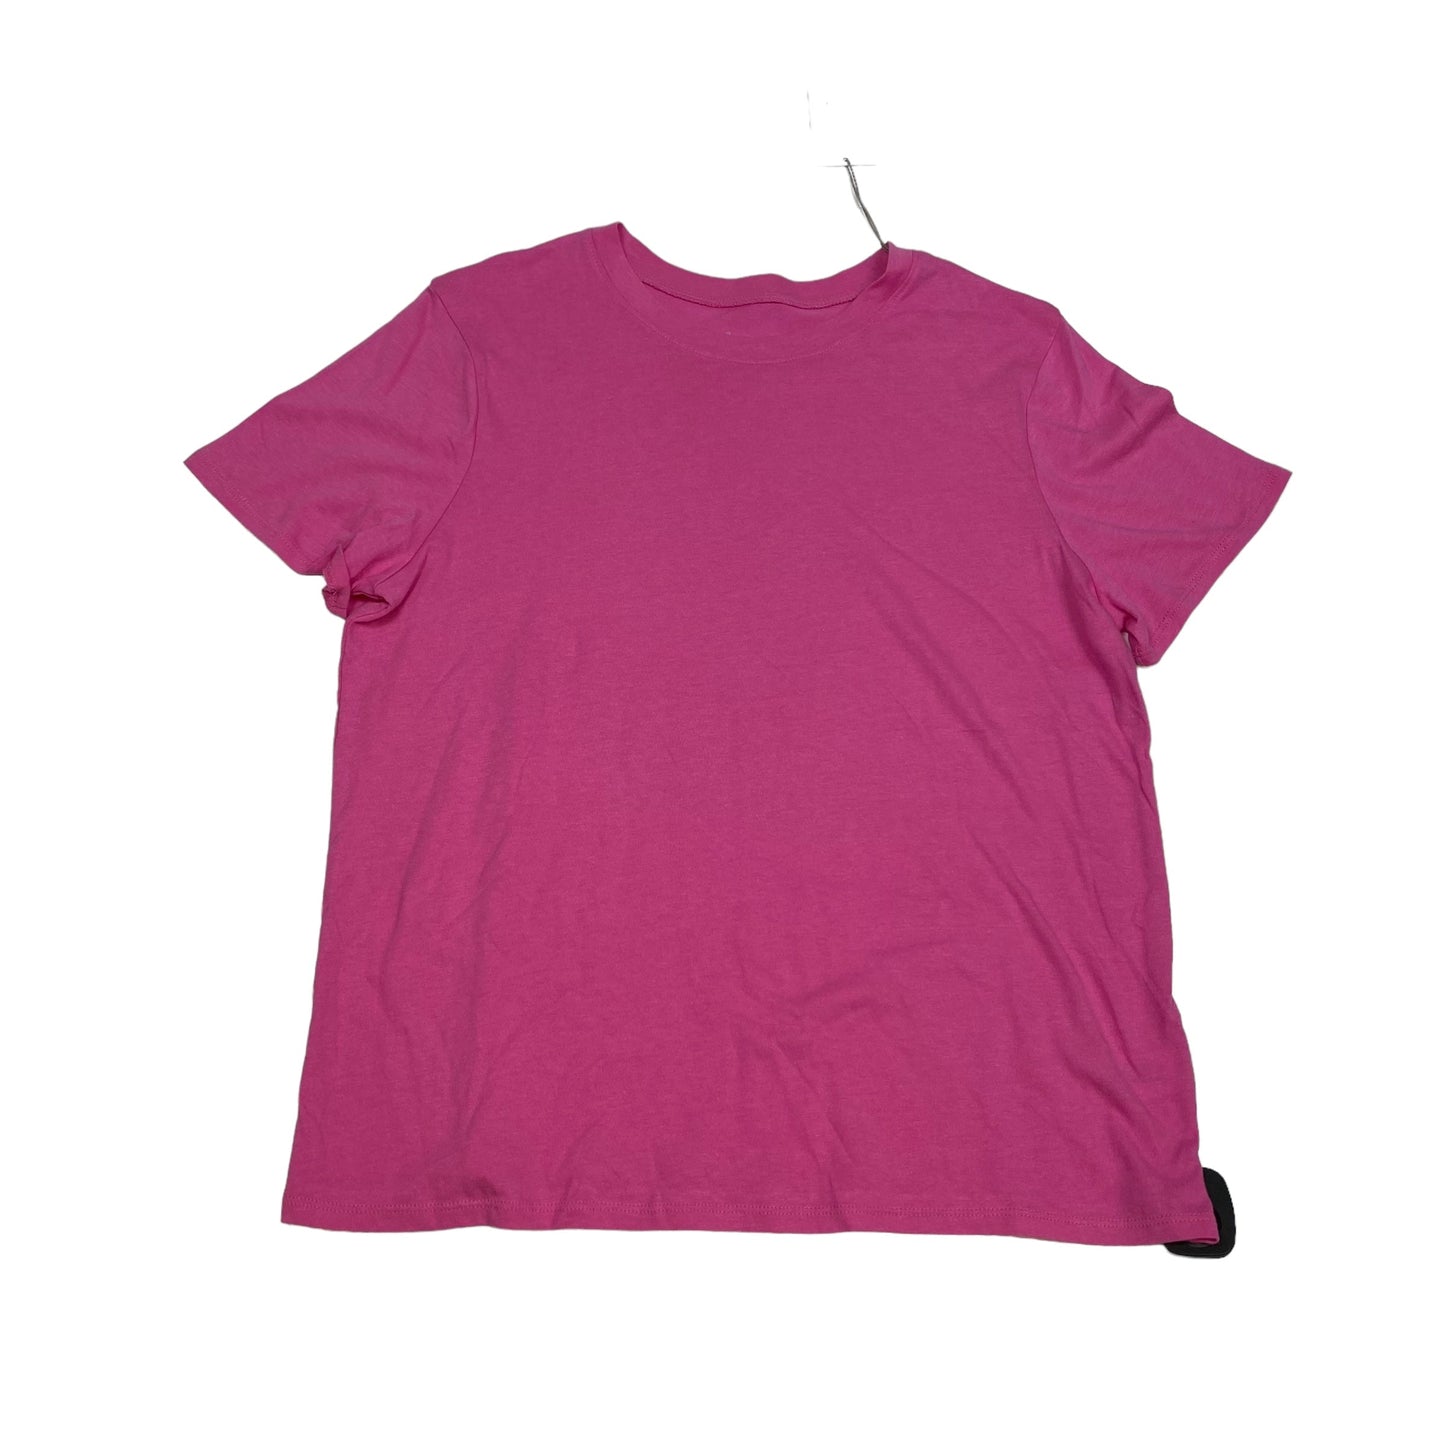 Pink Top Short Sleeve Basic A New Day, Size M